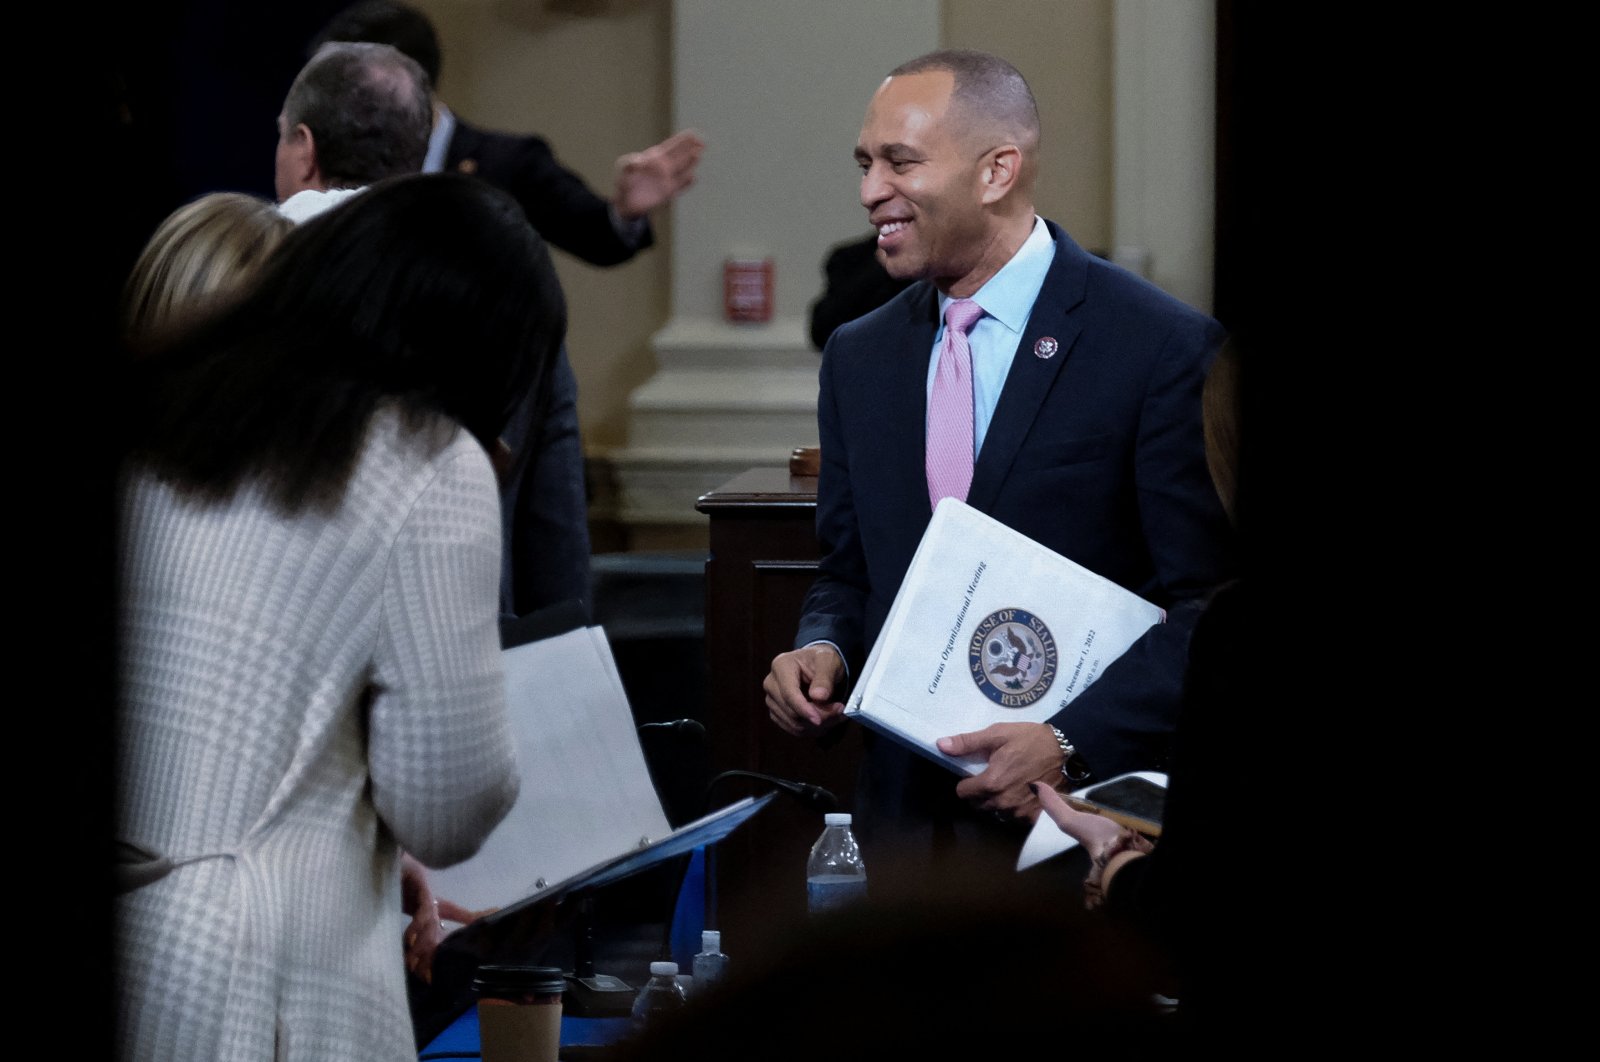 U.S. Rep. Hakeem Jeffries is seen through a doorway as he talks with other members of Congress inside the room of the House Democratic leadership elections on Capitol Hill in Washington, U.S., Nov. 30, 2022. (Reuters Photo)